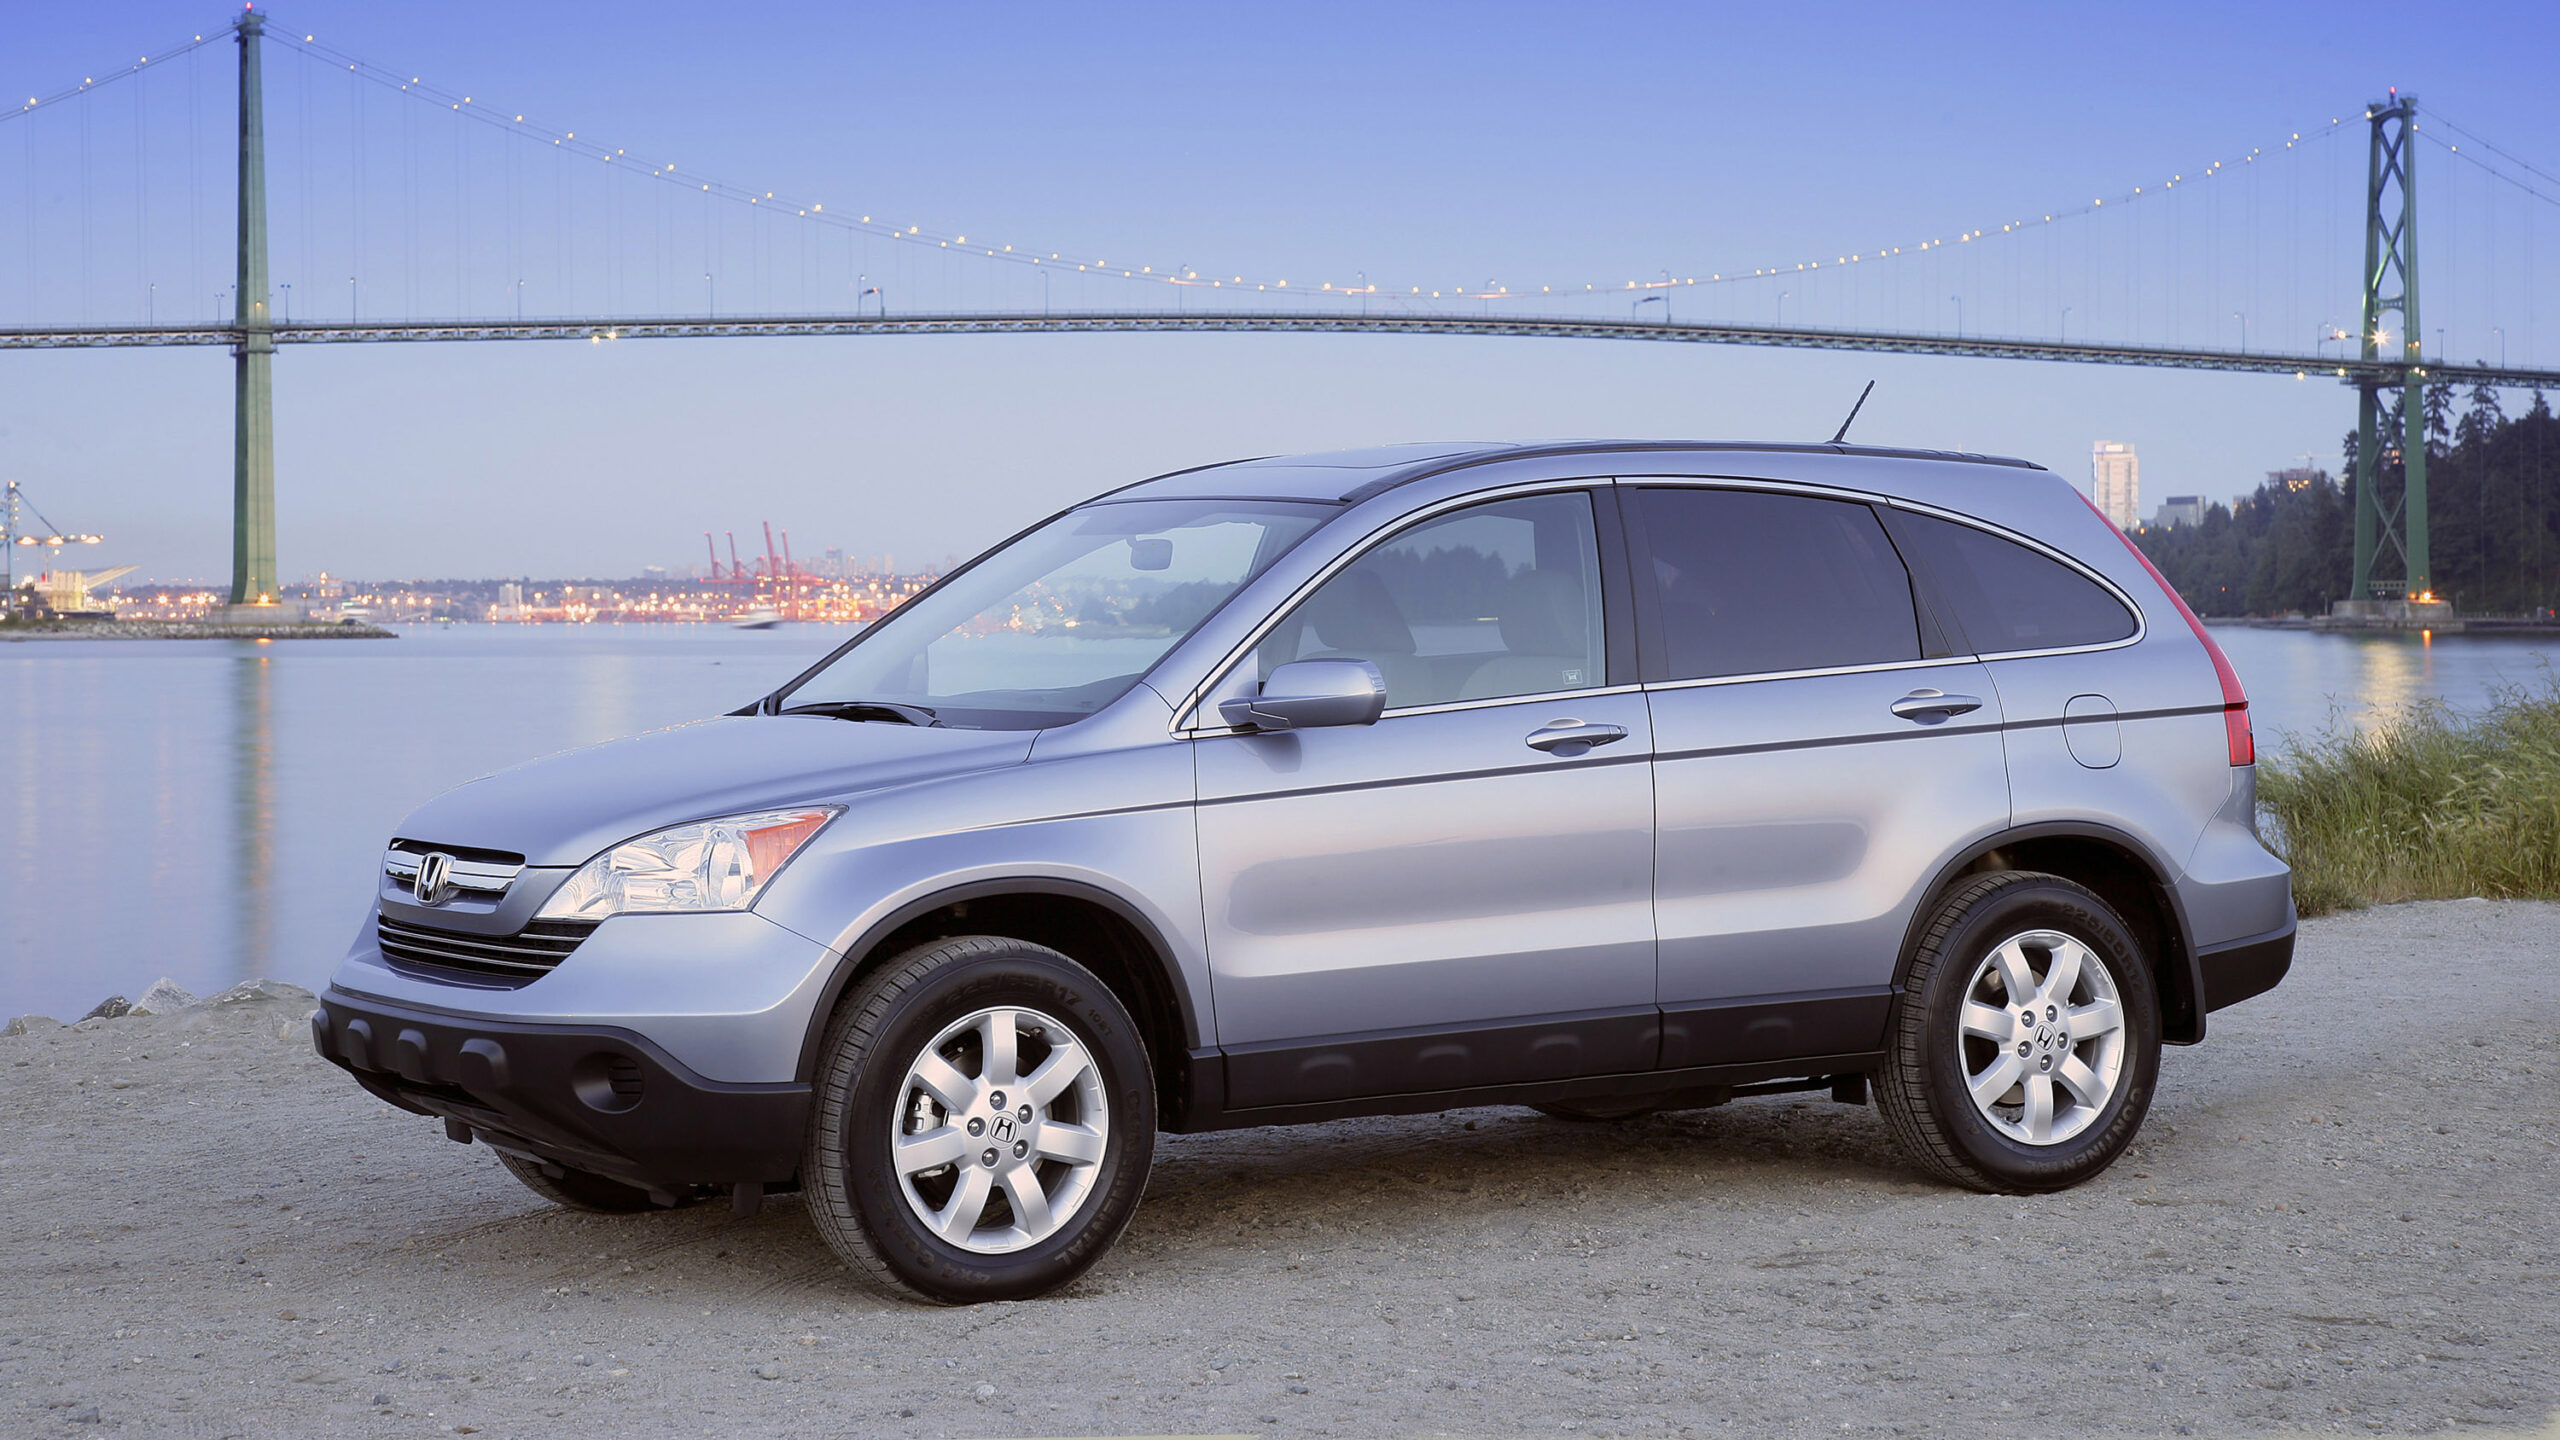 More Than 563,000 Honda CR-Vs Recalled for Rusted Frames That Can Corrode and Fail